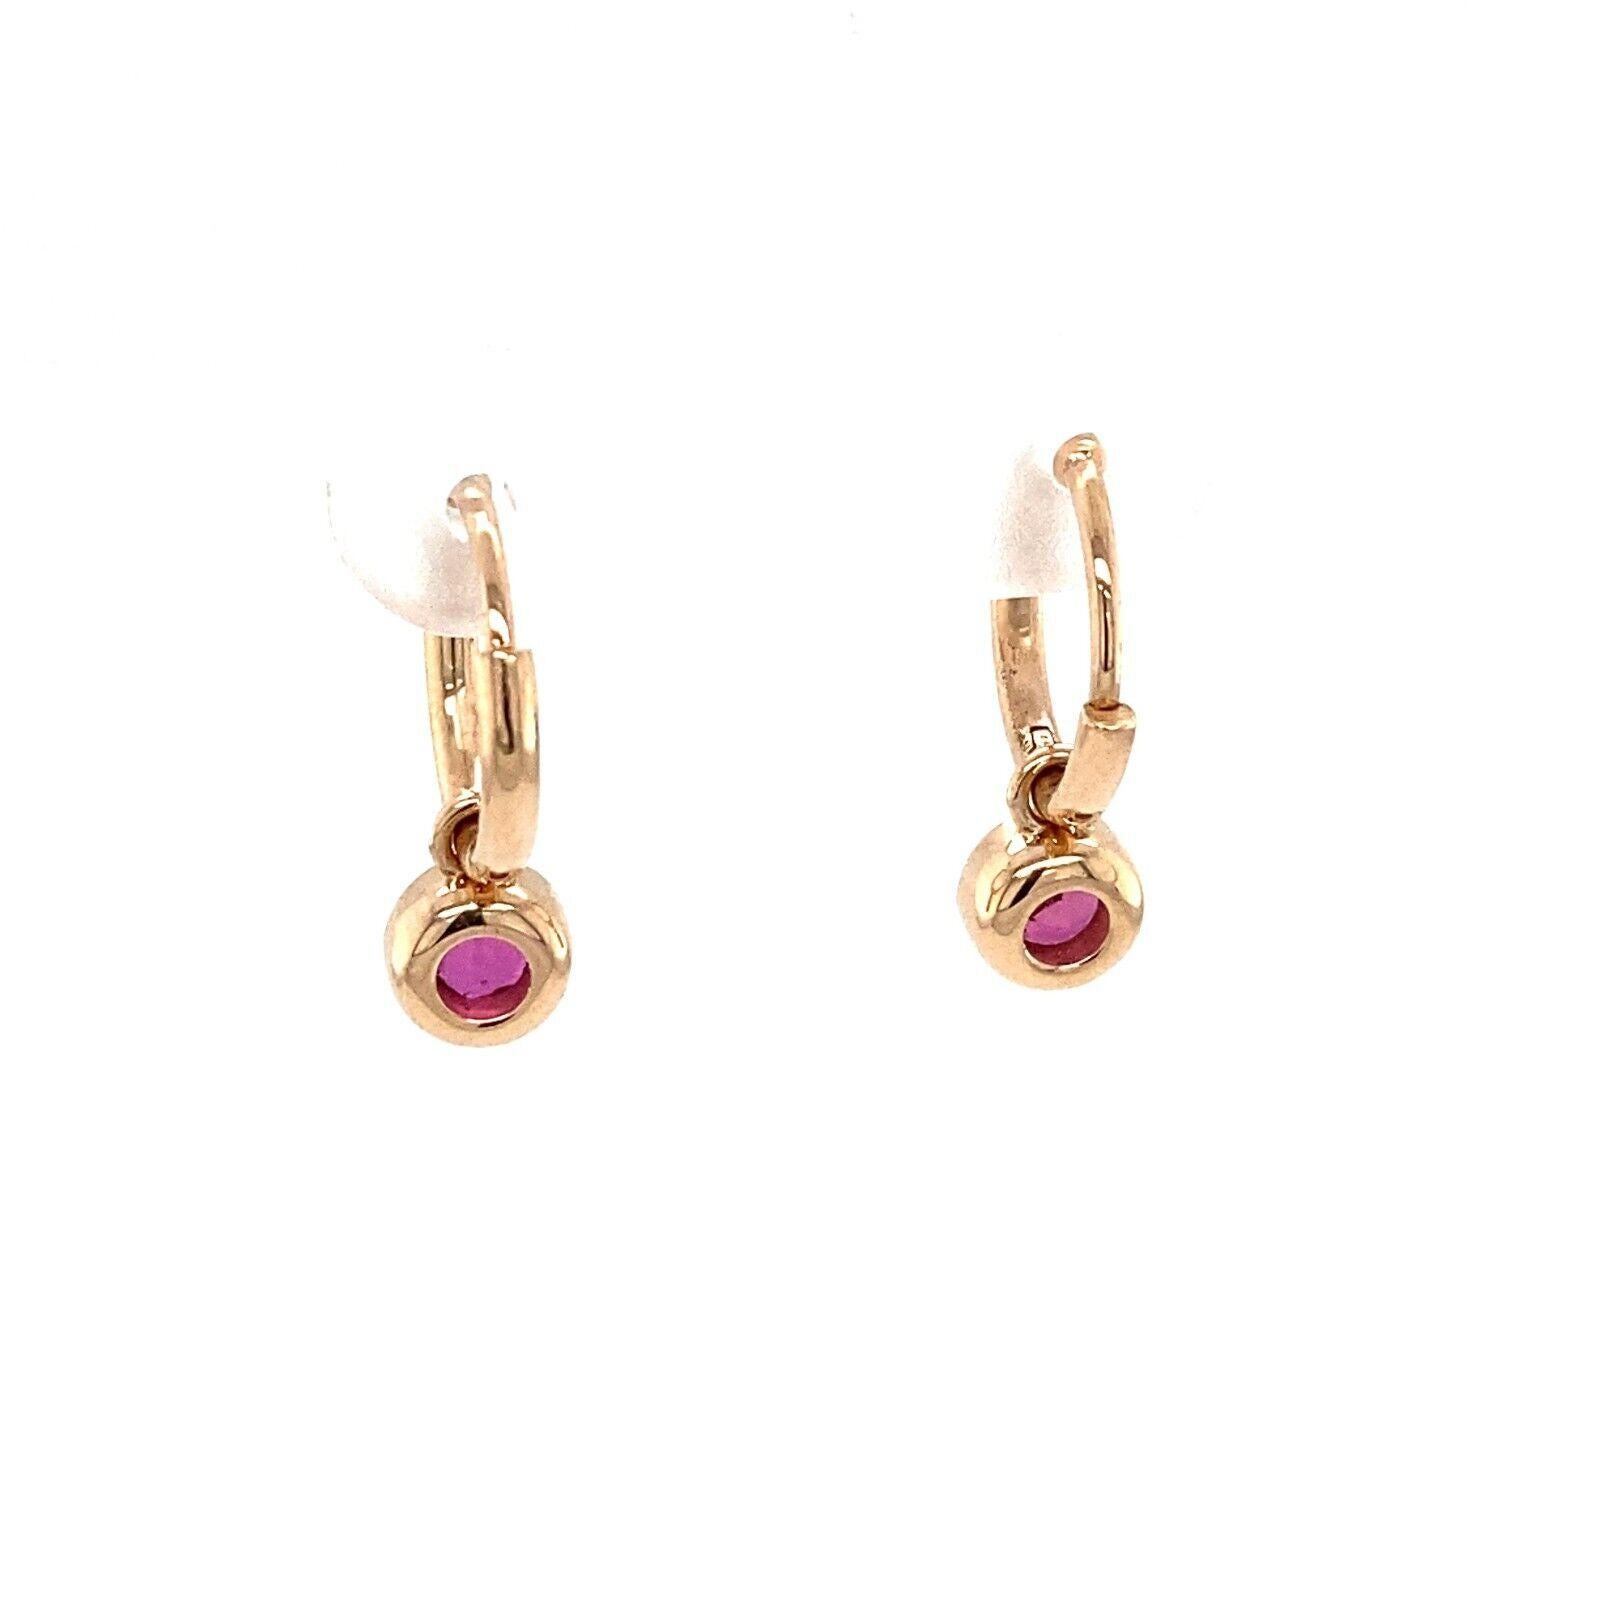 These stunning earrings are the perfect pair to add to your collection. These 14ct Yellow Gold hoop earrings have a total of 0.60ct Round Brilliant Cut natural Rubies is set in a bezel setting and attached to the hoop plain earring.

Additional